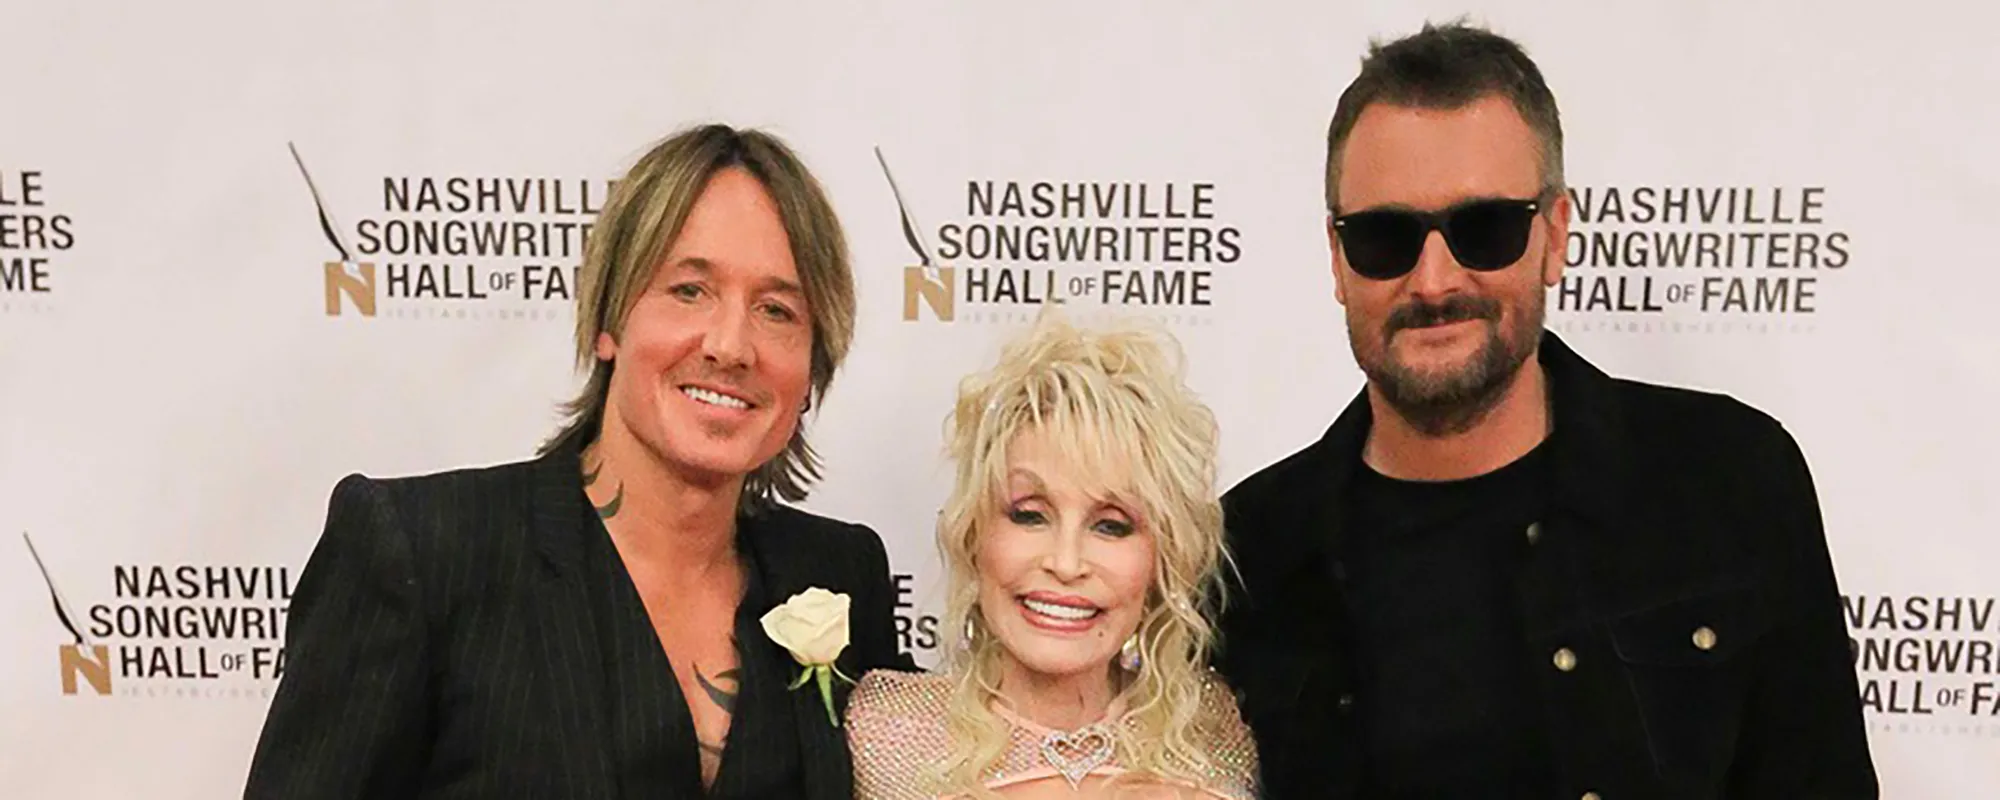 Dolly Parton, Kenny Chesney & Eric Church Honor Nashville Songwriters Hall of Fame Inductees